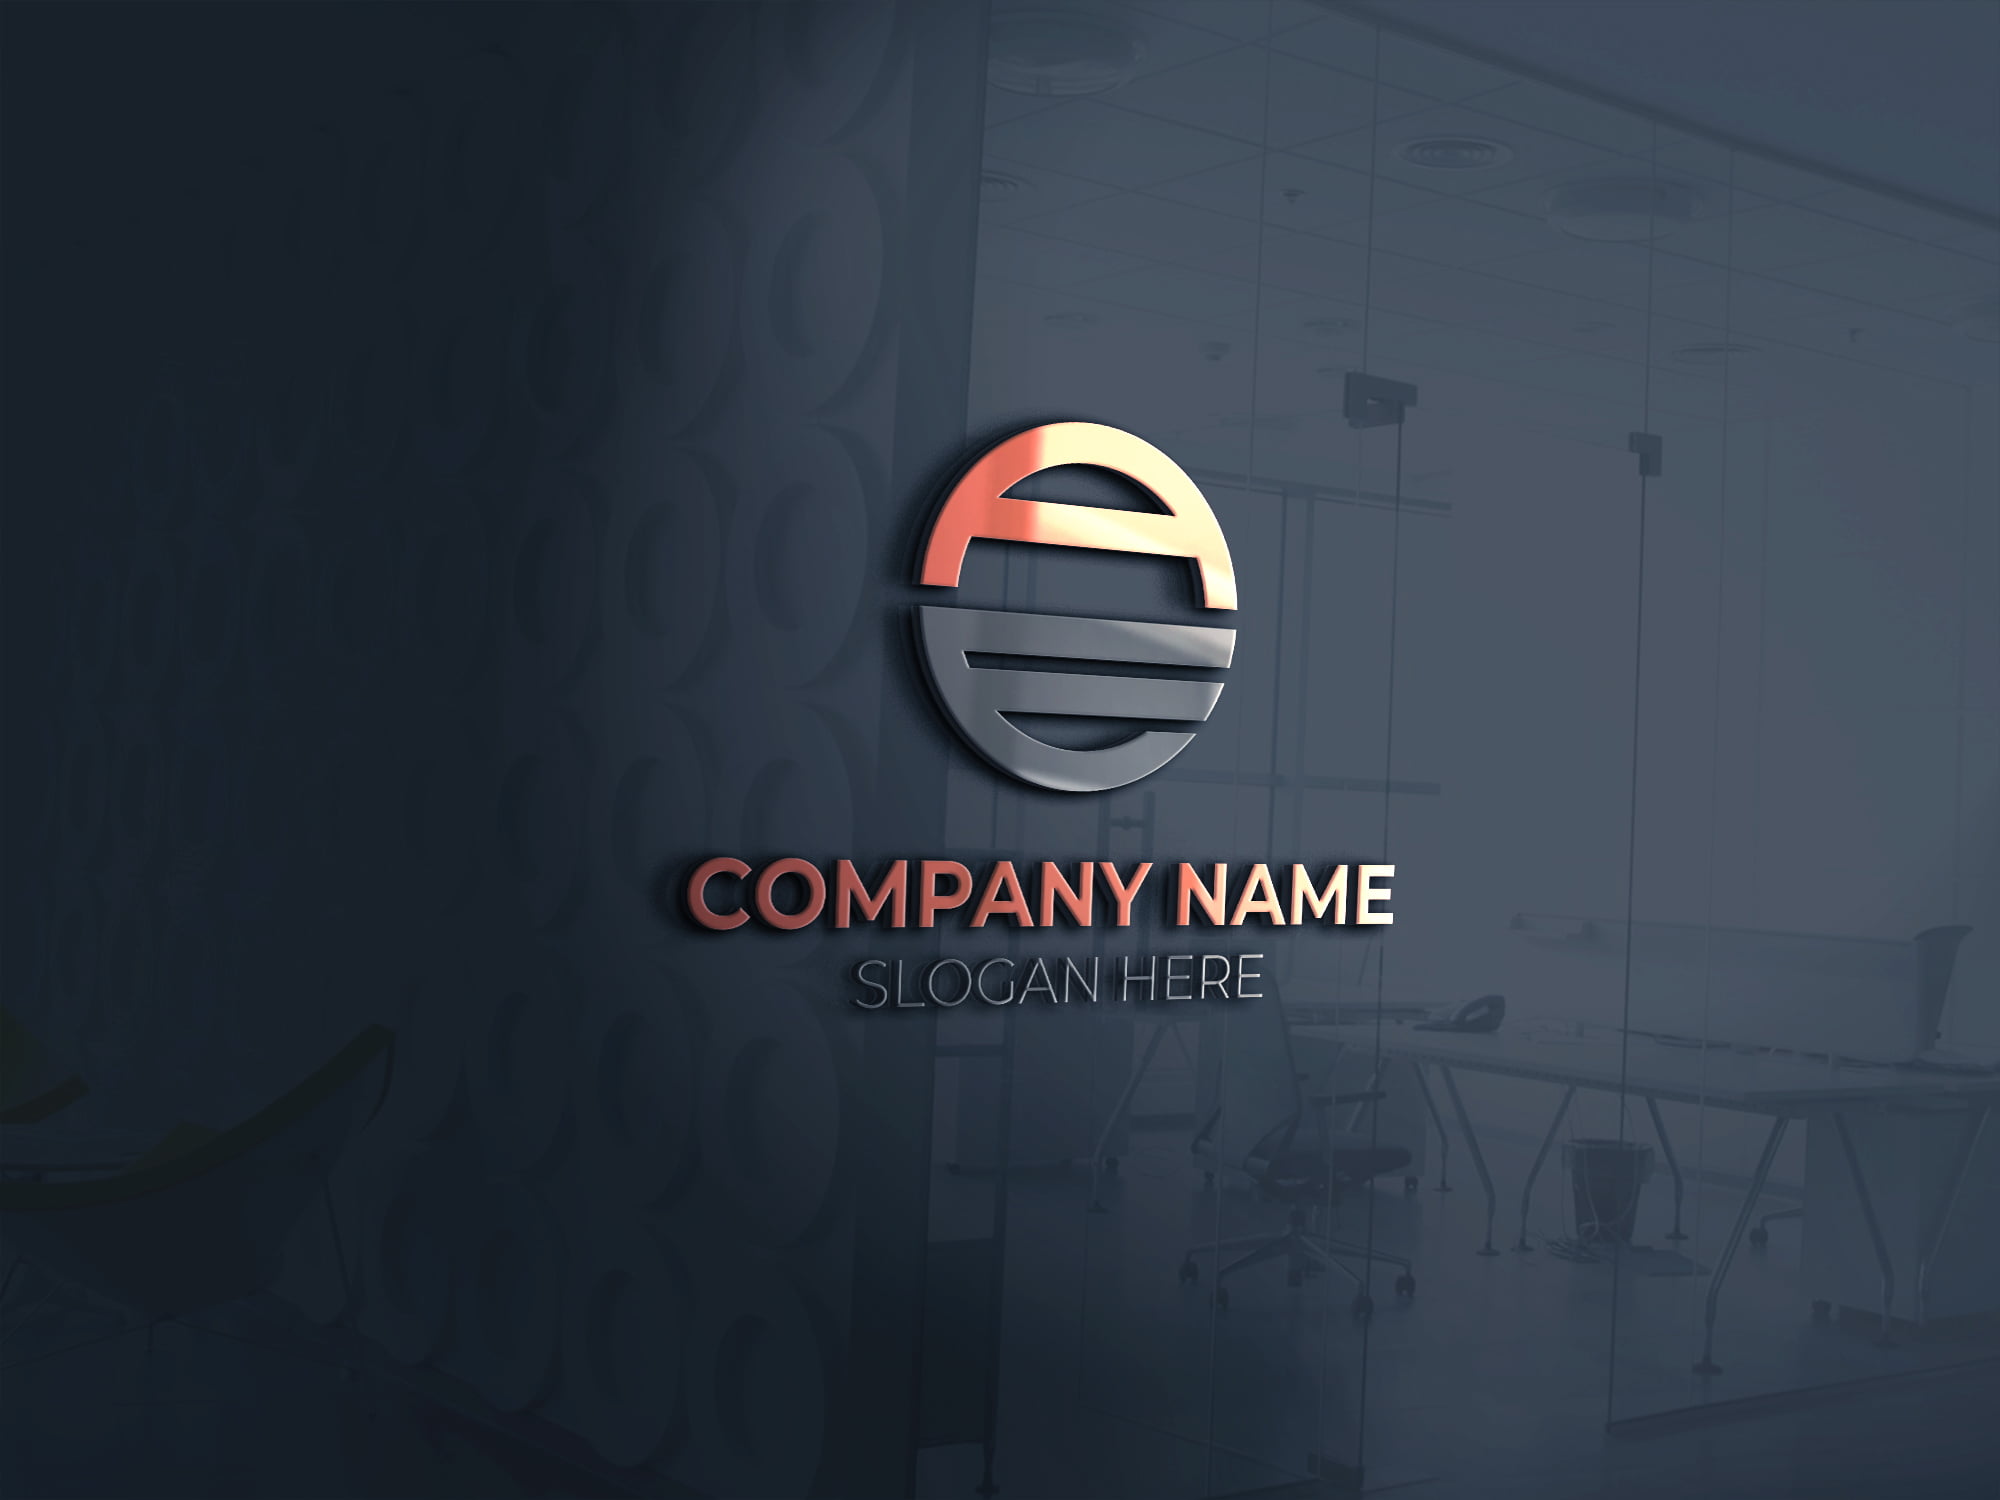 3D AE LETTER FOR YOUR COMPANY